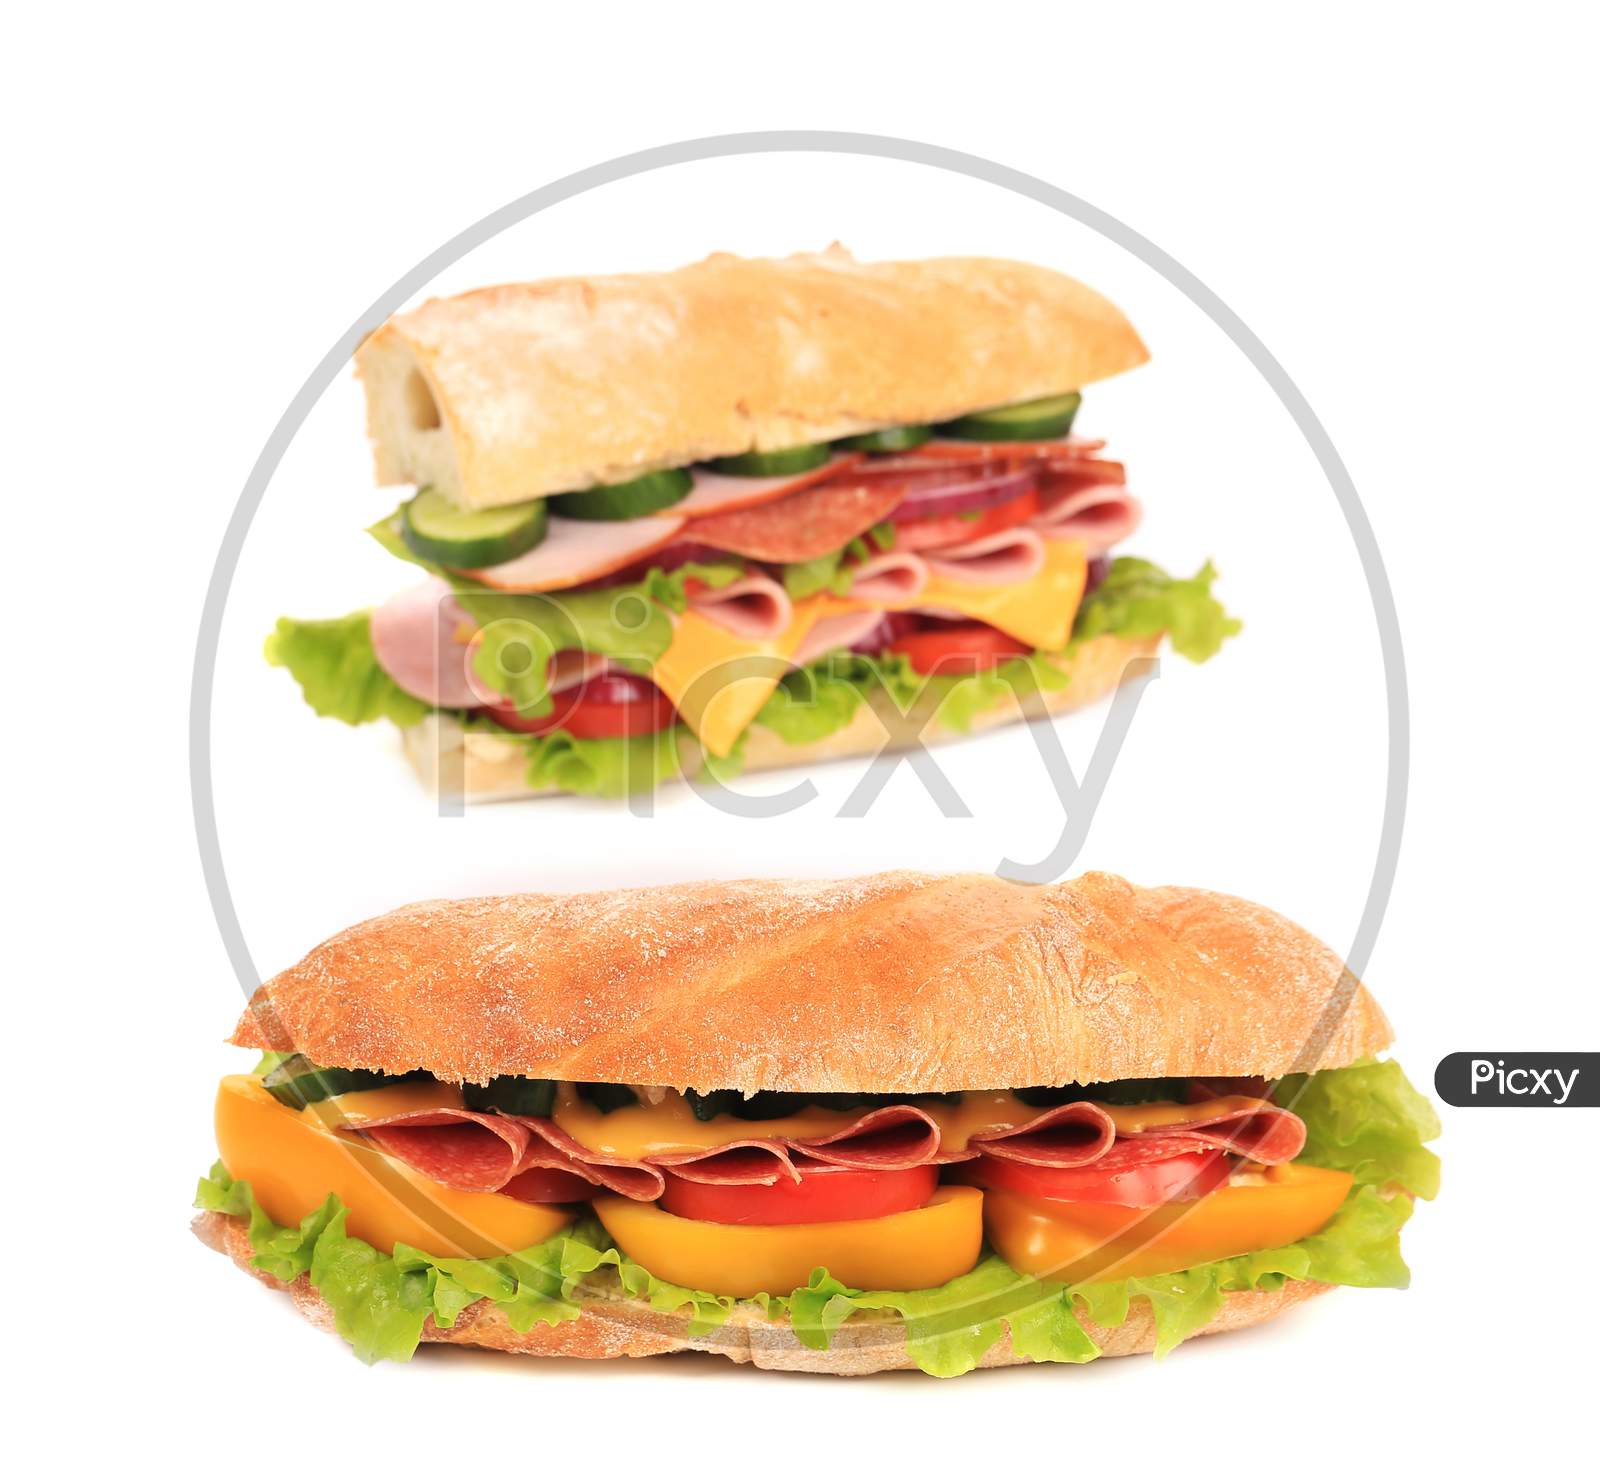 French Baguette Sandwich. Blurred. Isolated On A White Background.